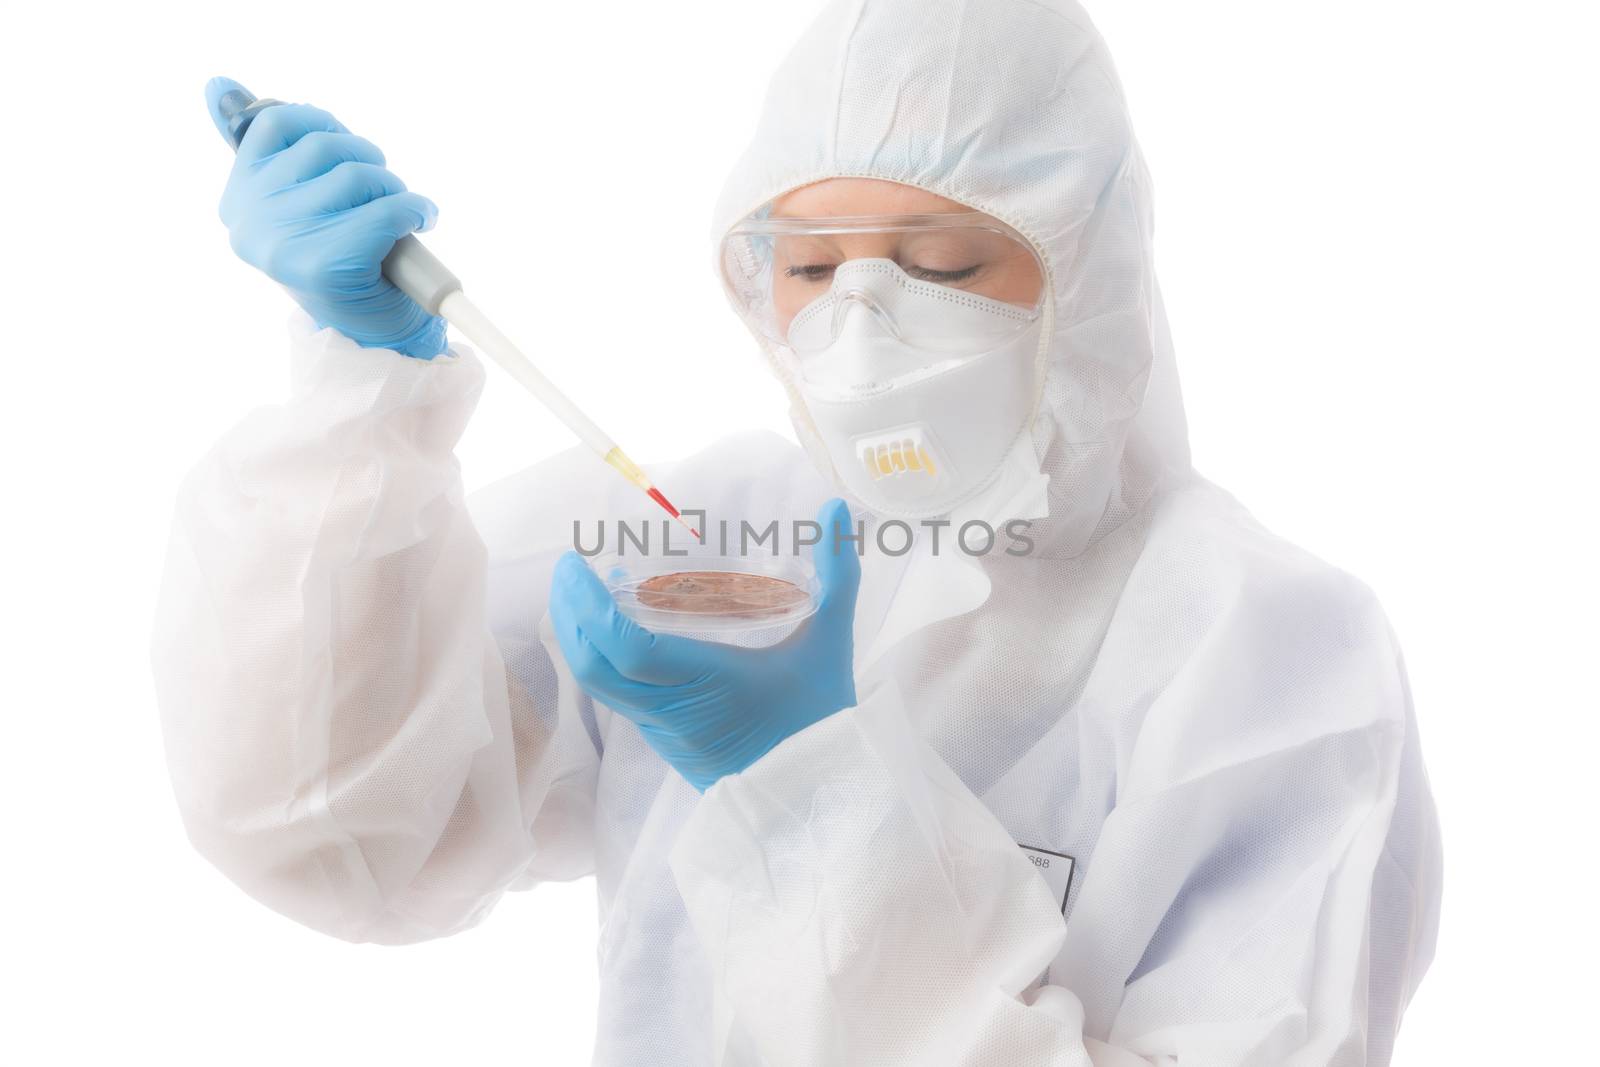 Female laboratory worker wearing protective hazmat biosecurity suit, gloves, respirator mask and goggles analyses samples